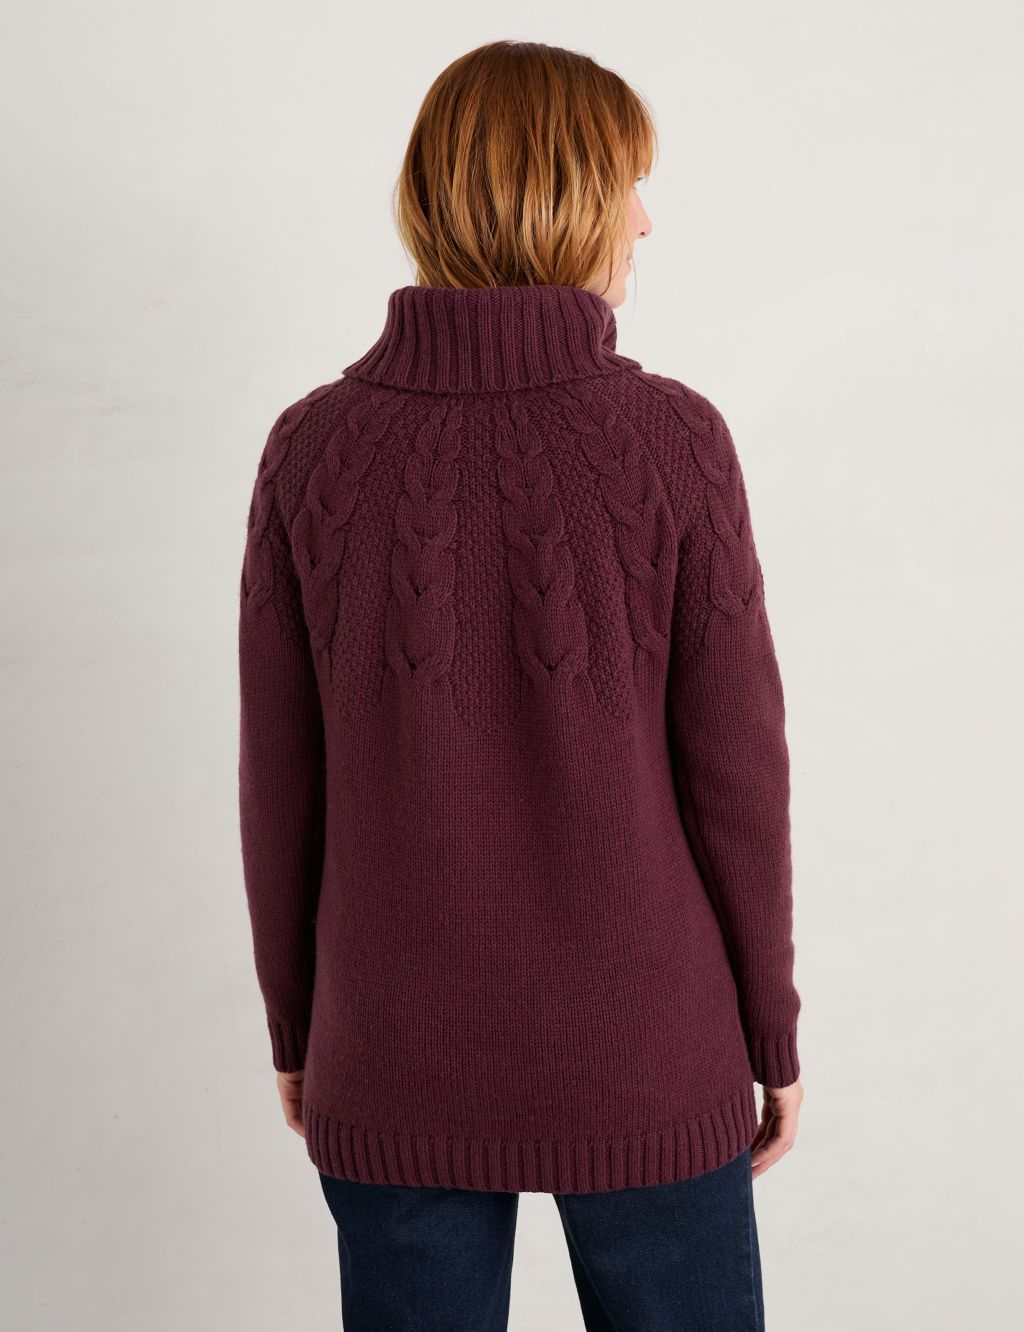 Patterned Roll Neck Jumper with Merino Wool image 4